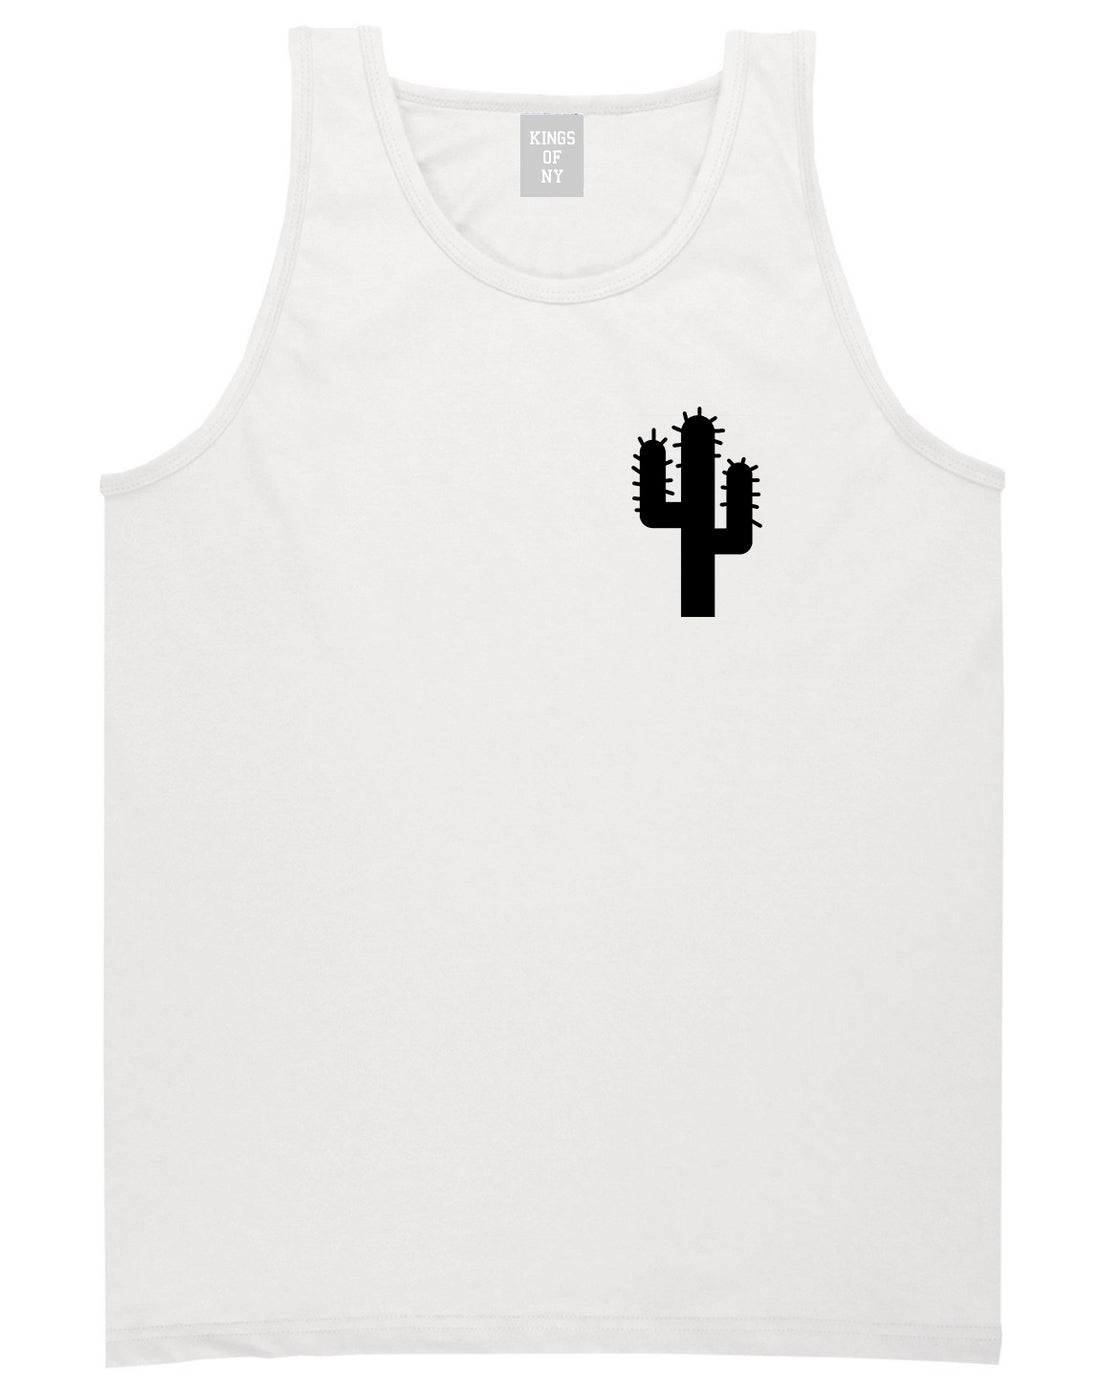 Cactus Logo Chest White Tank Top Shirt by Kings Of NY